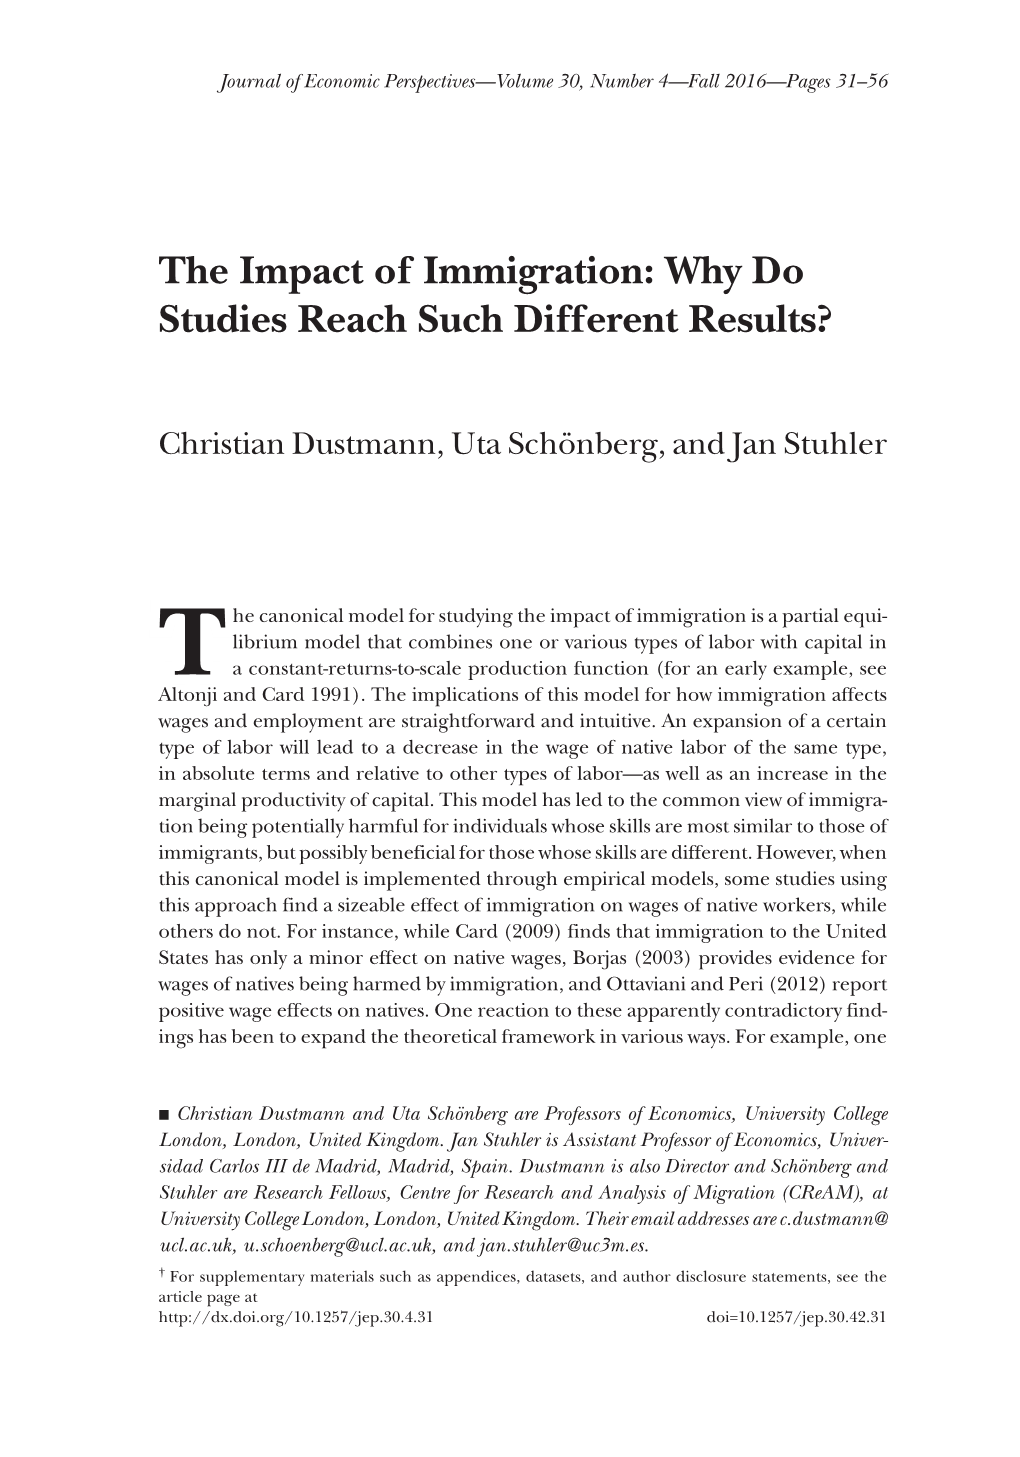 The Impact of Immigration: Why Do Studies Reach Such Different Results?